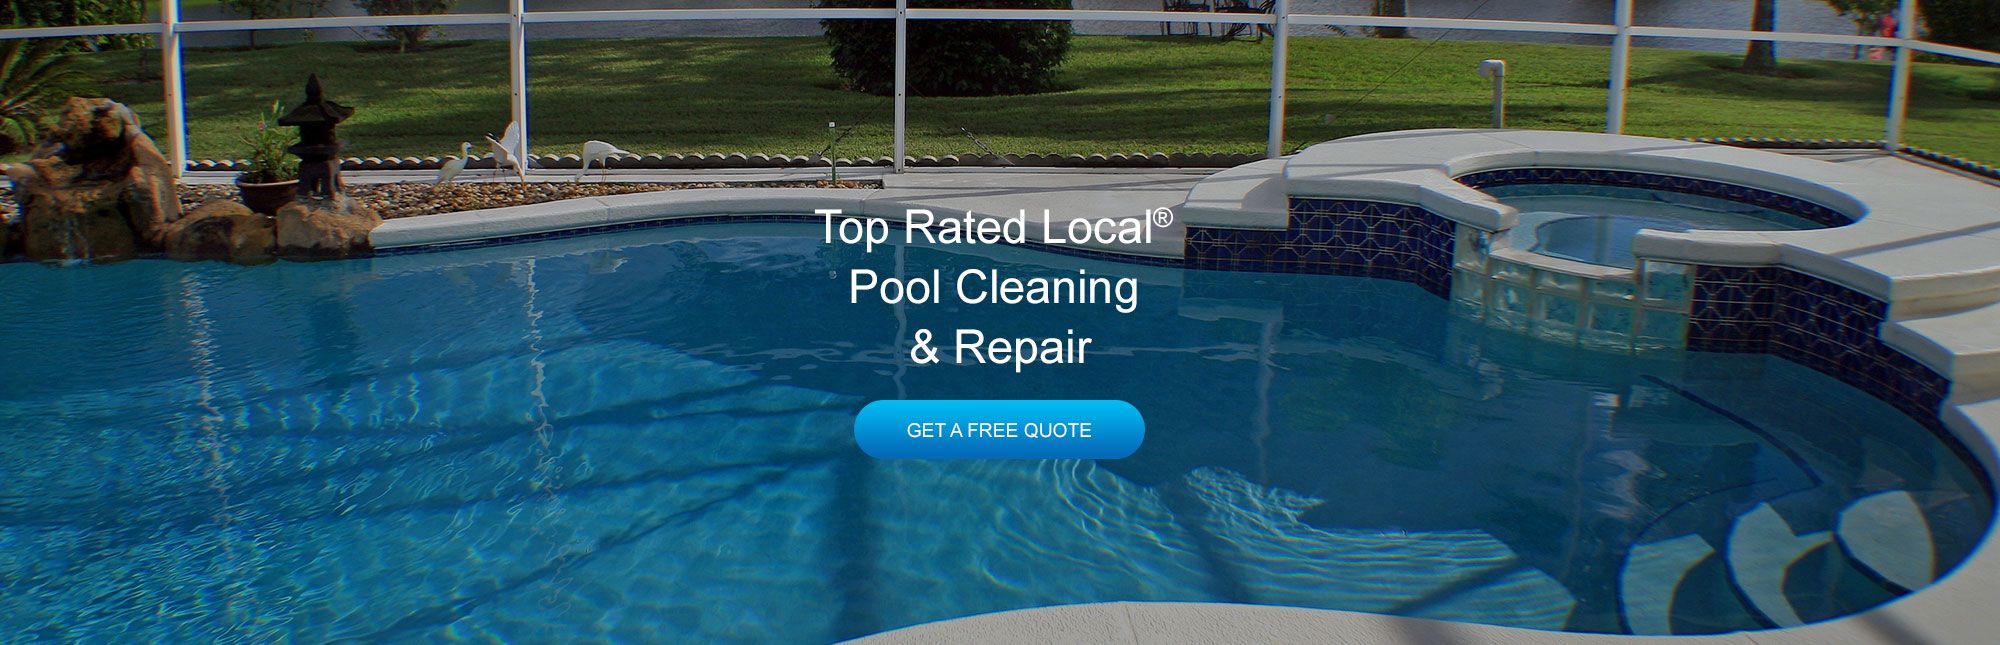 Always Clear Pool Cleaning - Top Rated Local Pool Cleaners In Brevard - Always Clear Pool Cleaning - Top Rated Local Pool Cleaners